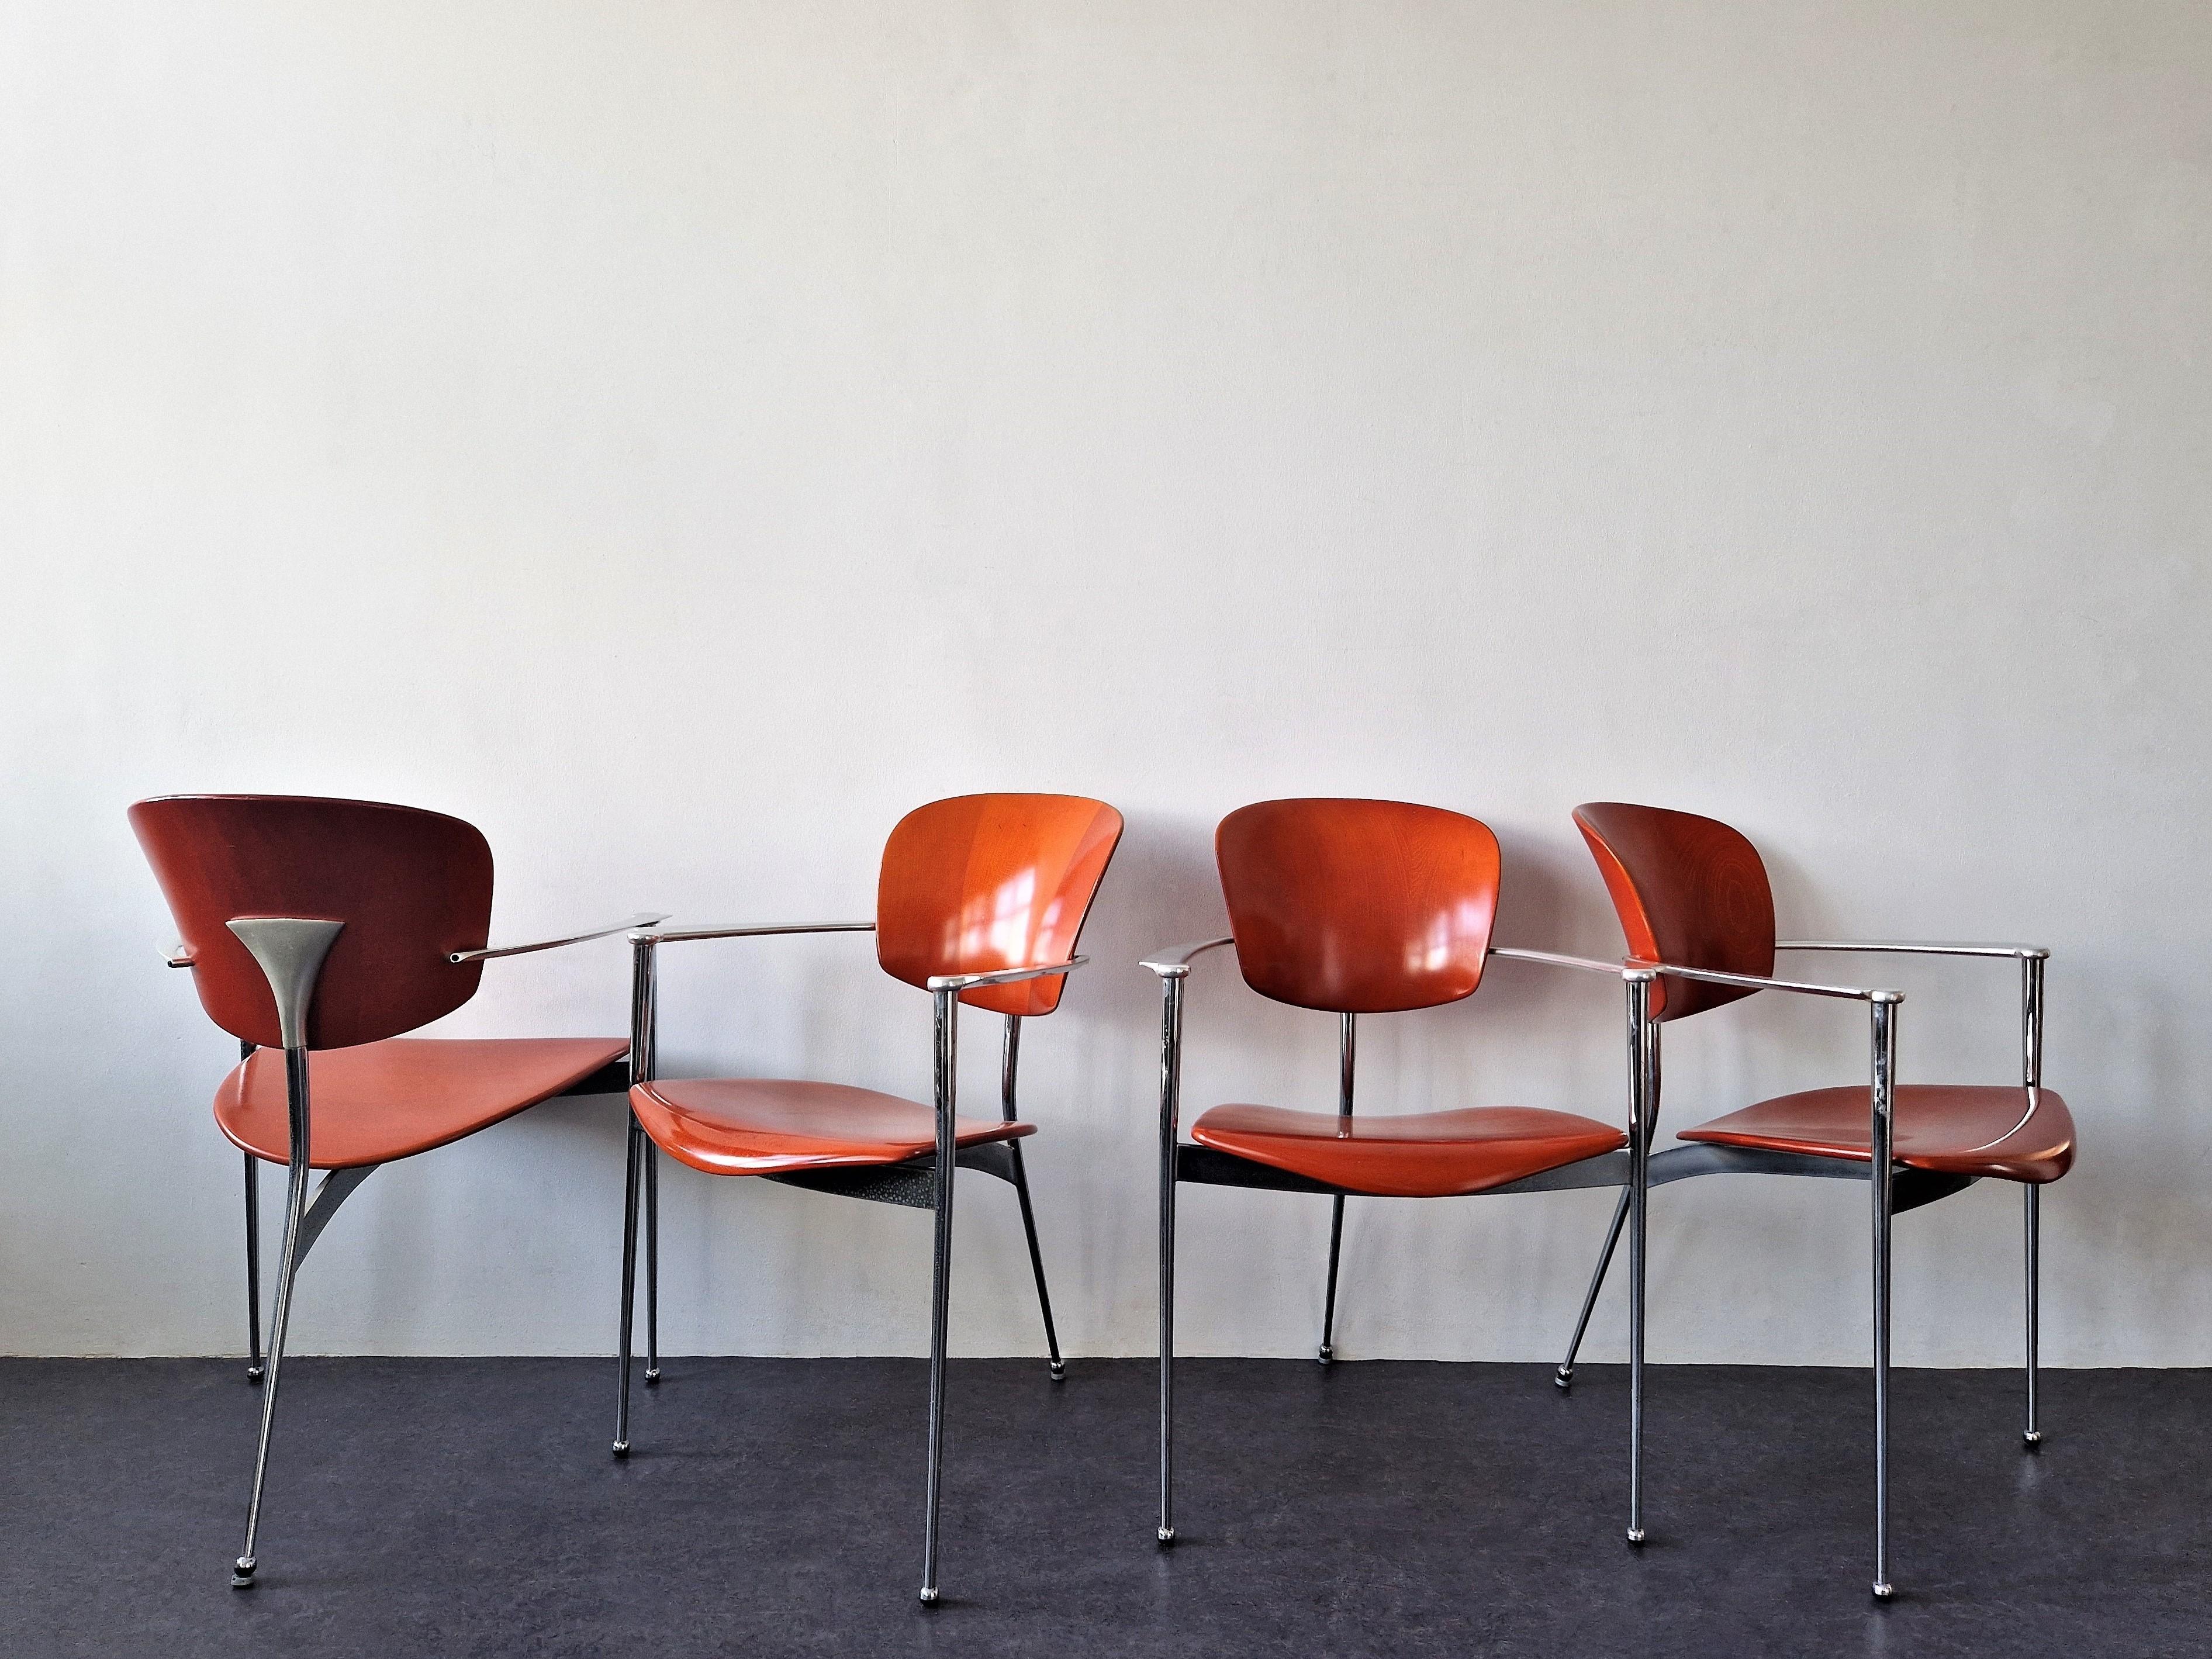 Aluminum Set of 4 'Andrea' Dining Chairs by Josep Llusca for Andreu World, Italy, 1986